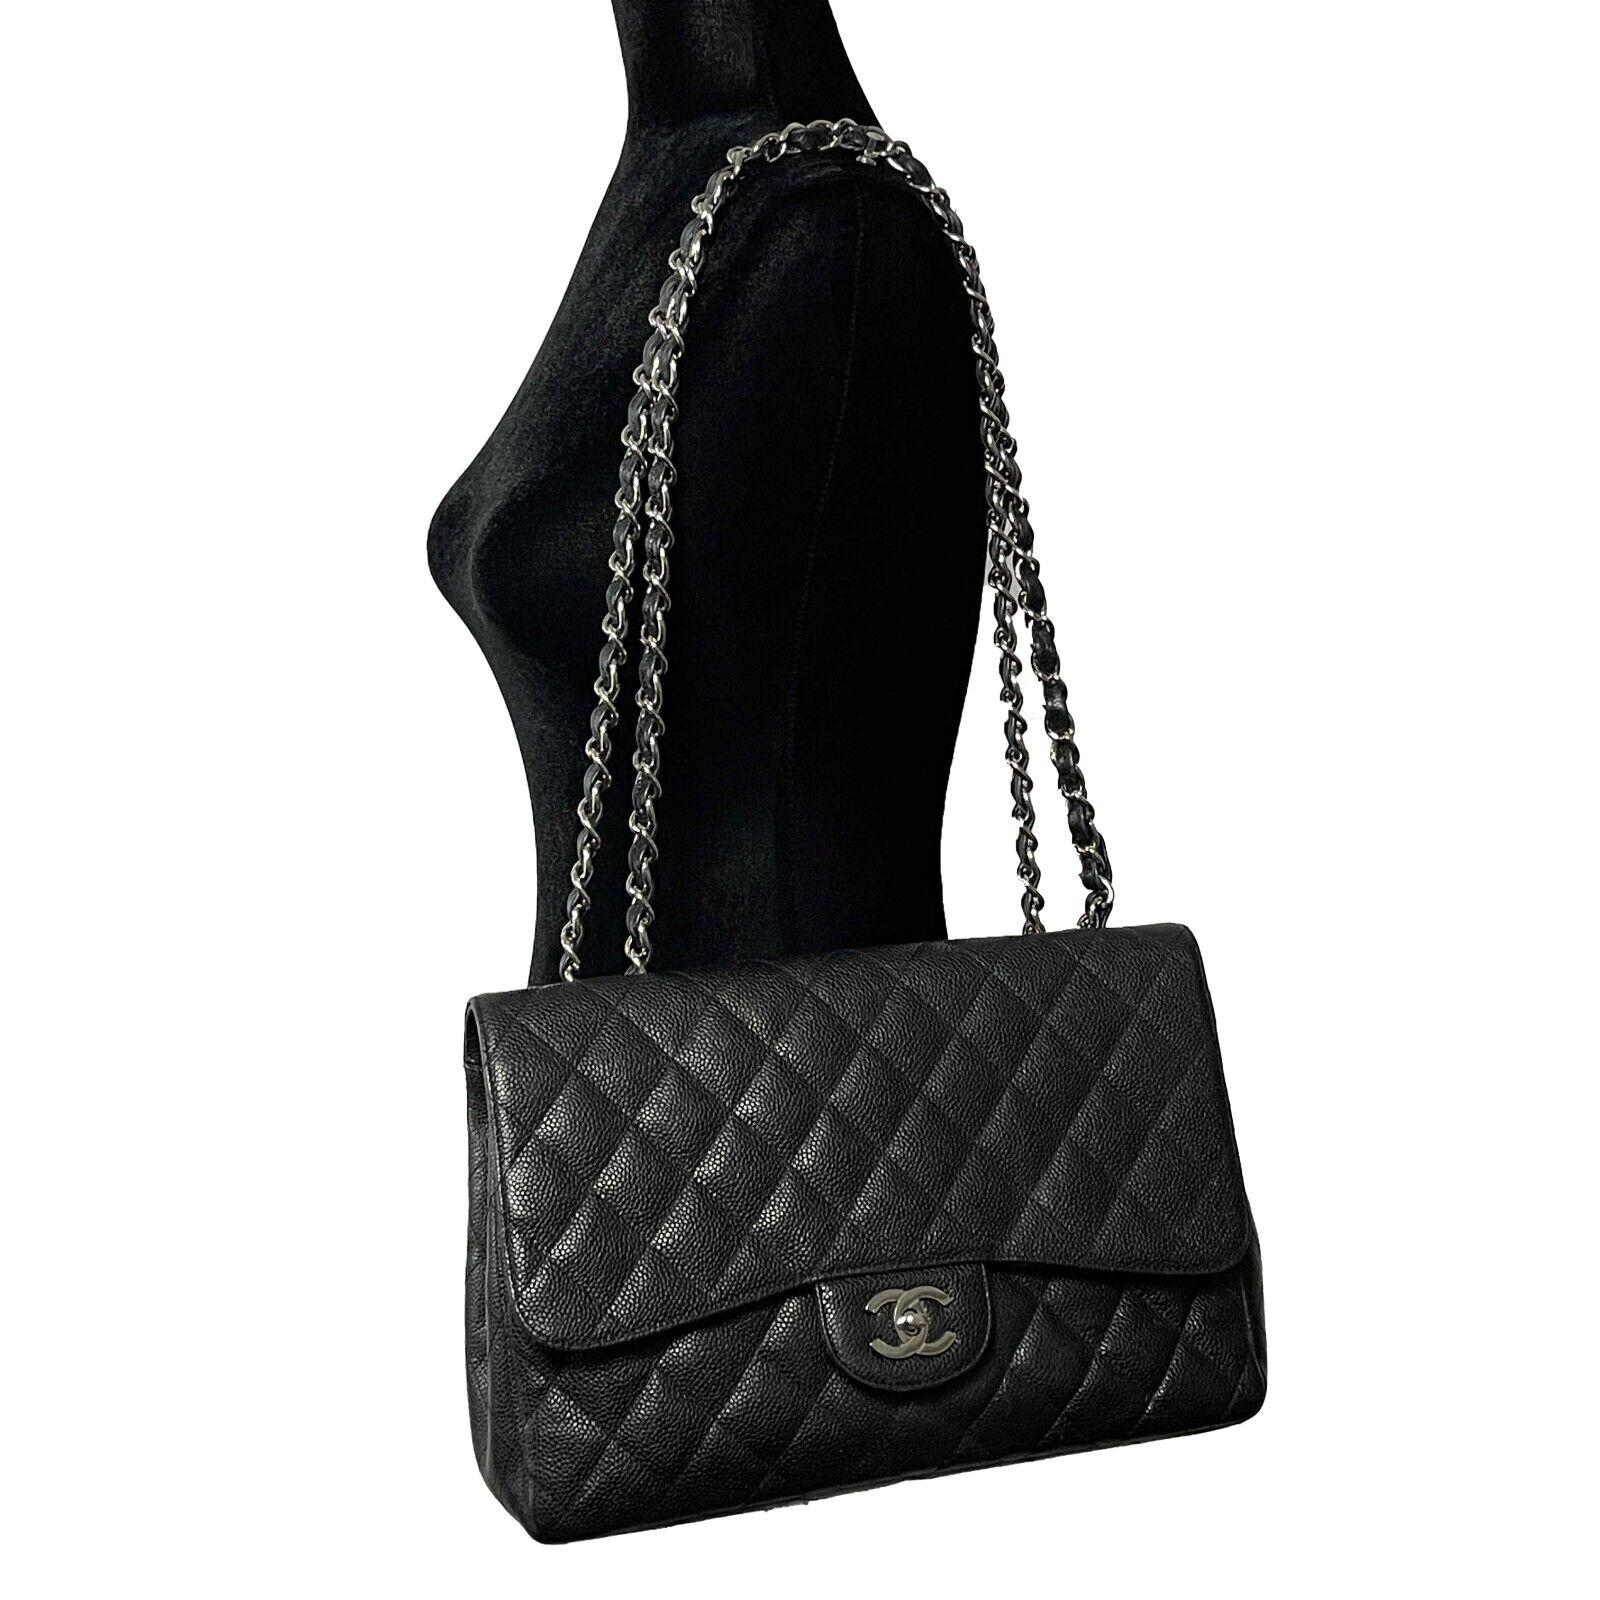 Chanel Black Quilted Soft Caviar Stretch Flap with Silver Hardware, 2010 (Very Good), Womens Handbag